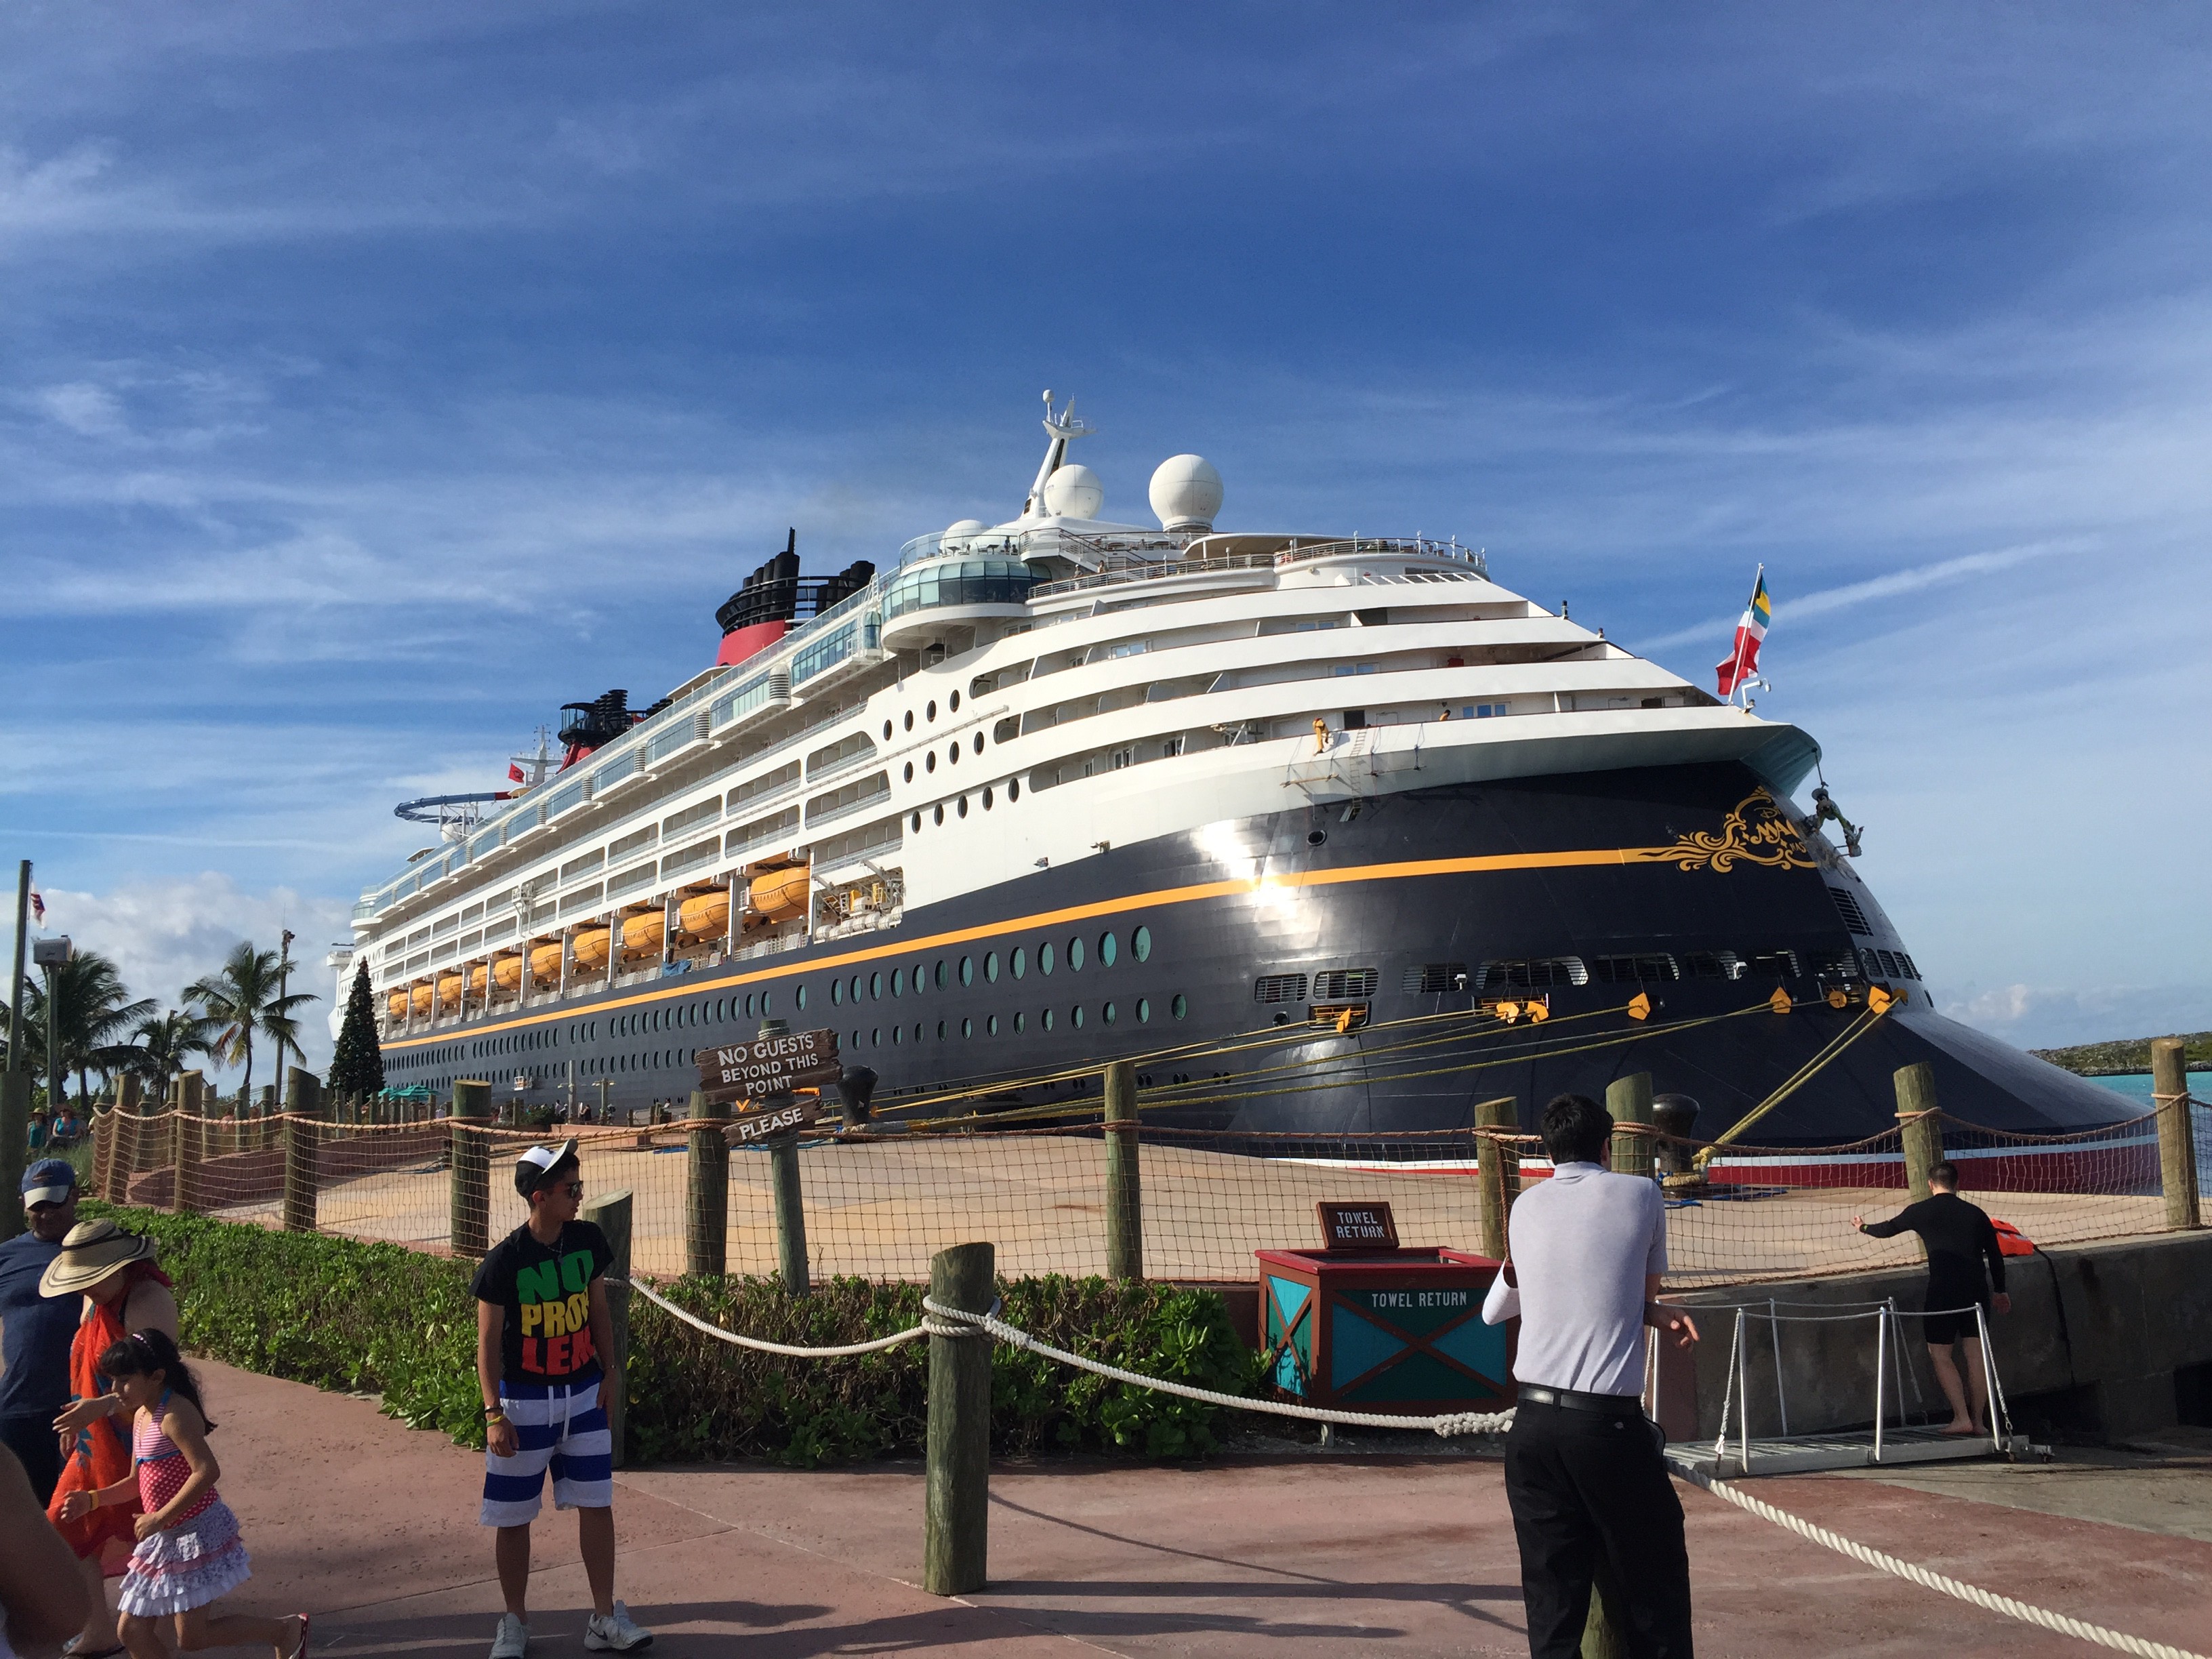 I’ve booked my dream Disney Cruise…now what??